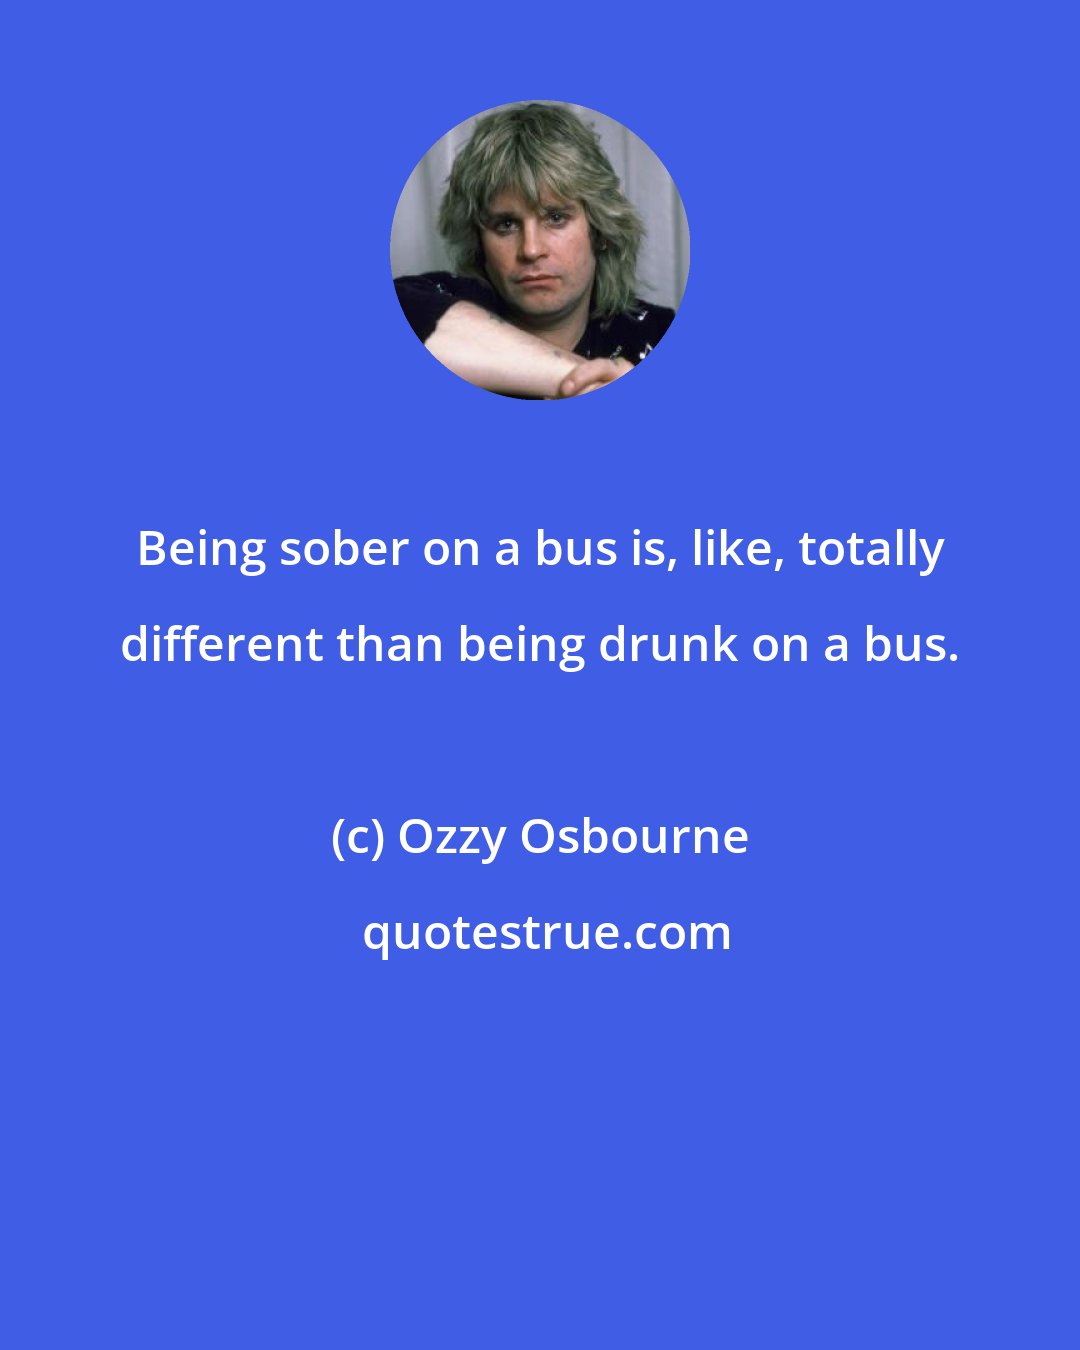 Ozzy Osbourne: Being sober on a bus is, like, totally different than being drunk on a bus.